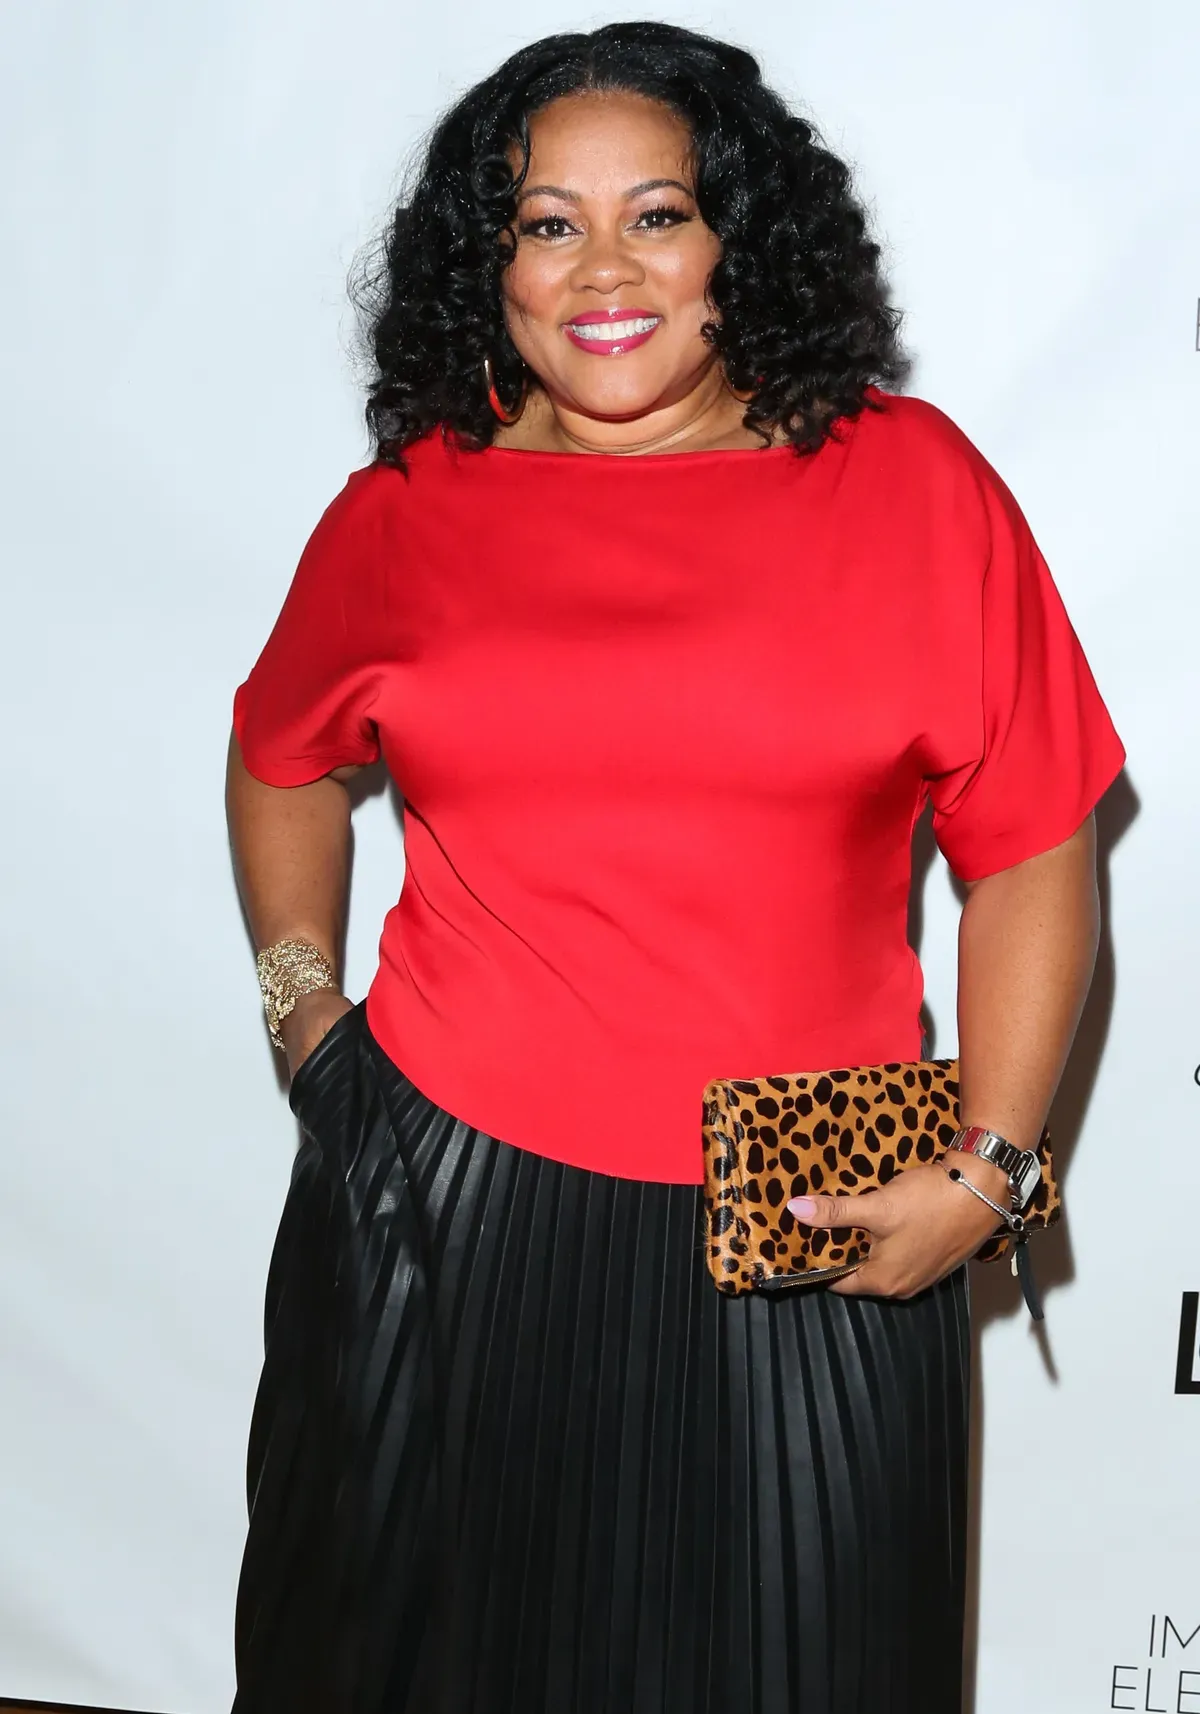 Lela Rochon attends the release party for the book "Every Day I'm Hustling" at Rain Bar and Lounge on April 8, 2018 | Photo: Getty Images